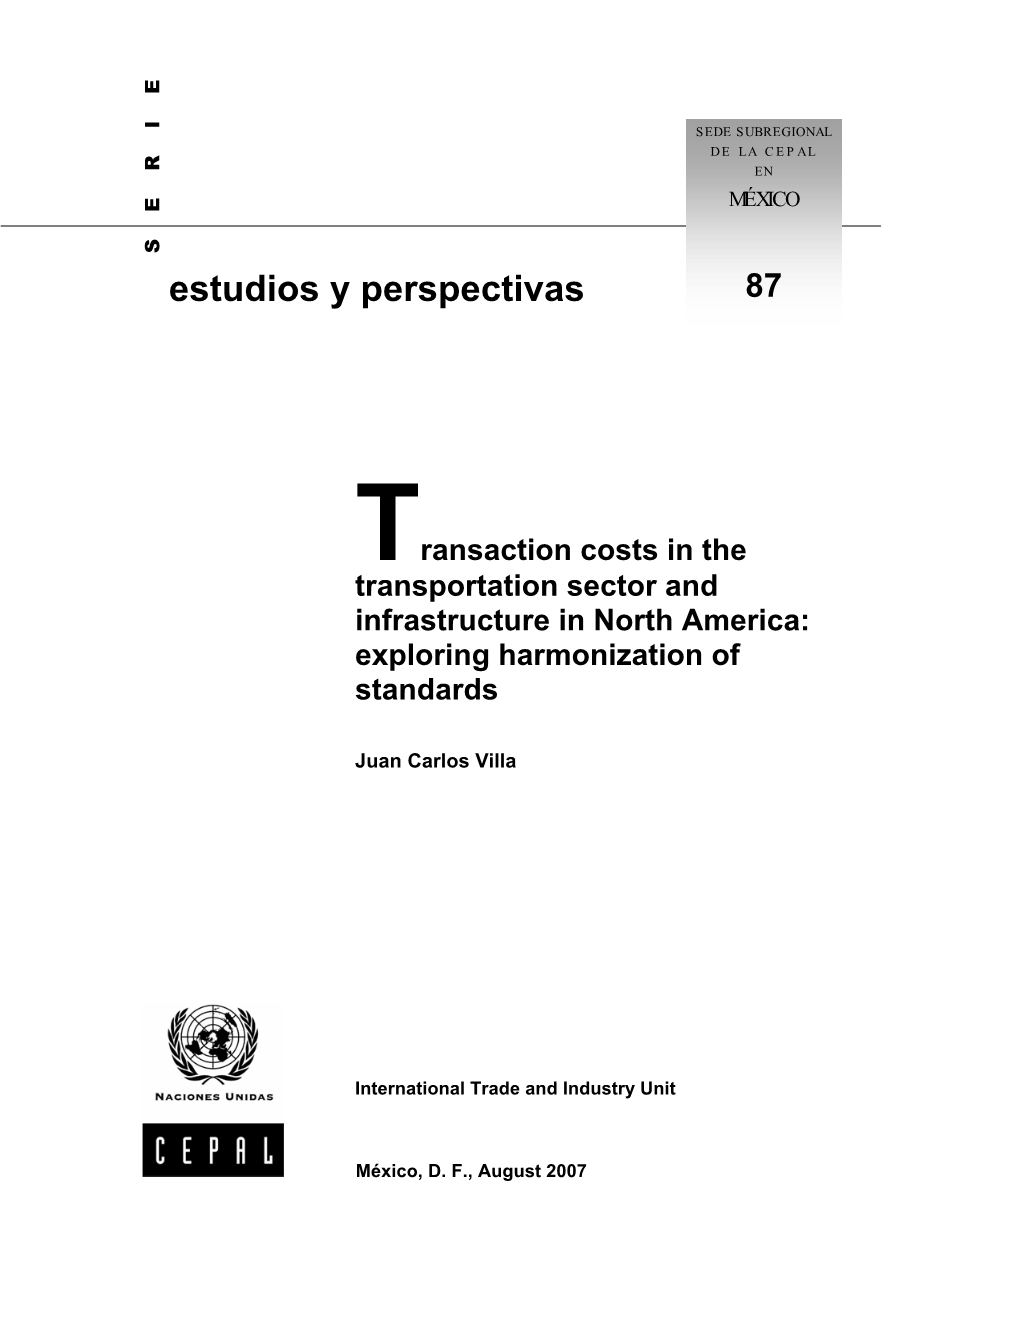 Transaction Costs in the Transportation Sector and Infrastructure in North America: Exploring Harmonization of Standards